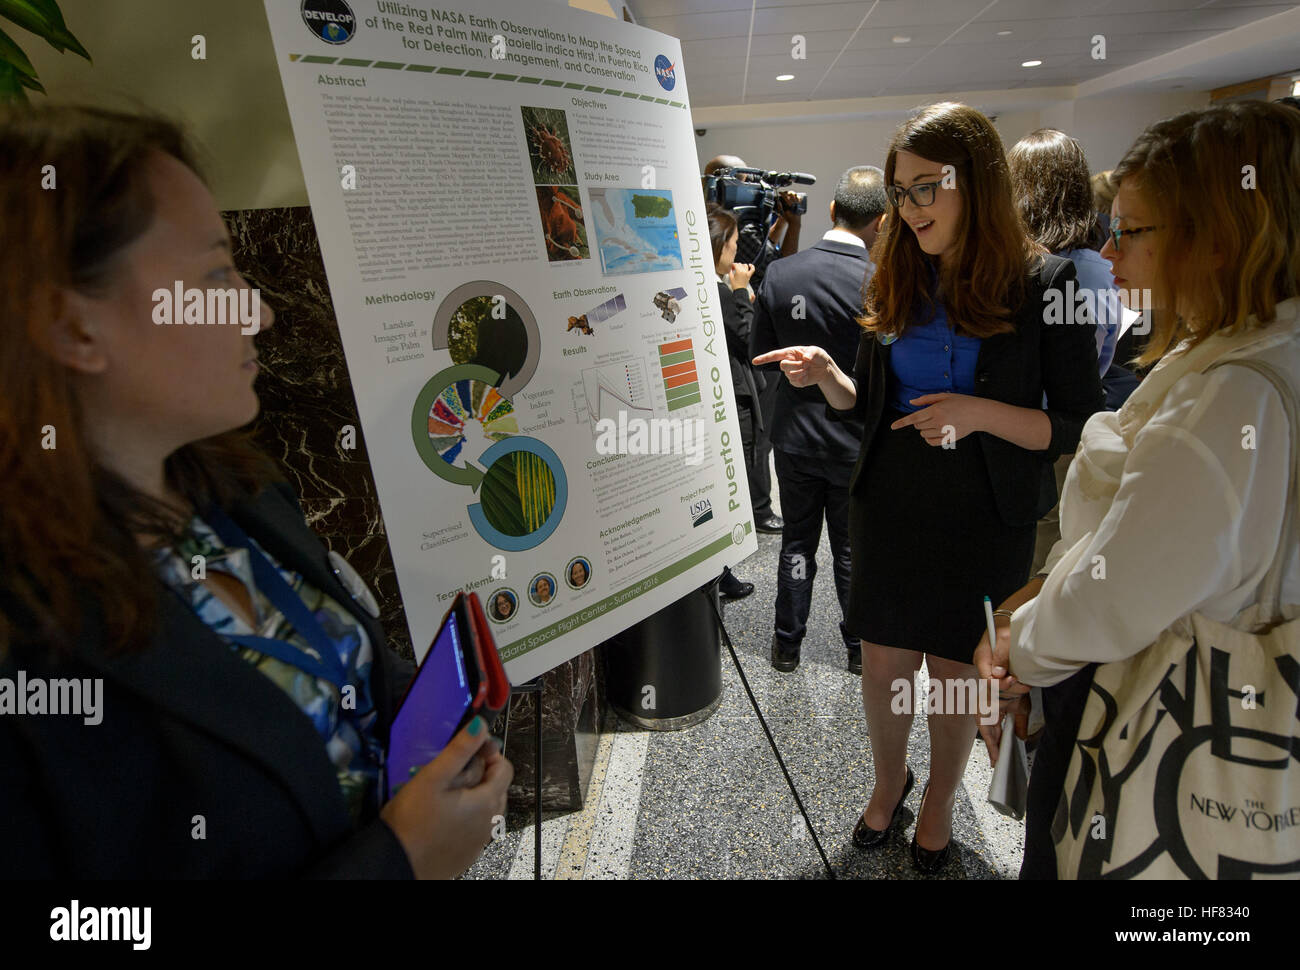 CUNY Hunter college Master's graduate Julia Marrs, center, talks to attendees about her work with Puerto Rico agriculture during the 2016 Annual Earth Science Applications Showcase, Wednesday, Aug. 10, 2016, at NASA Headquarters in Washington. Every summer students and young professionals from NASA’s Applied Sciences’ DEVELOP National Program come to NASA Headquarters and present their research projects. DEVELOP is a training and development program where students work on Earth science research projects, mentored by science advisers from NASA and partner agencies, and extend research results t Stock Photo